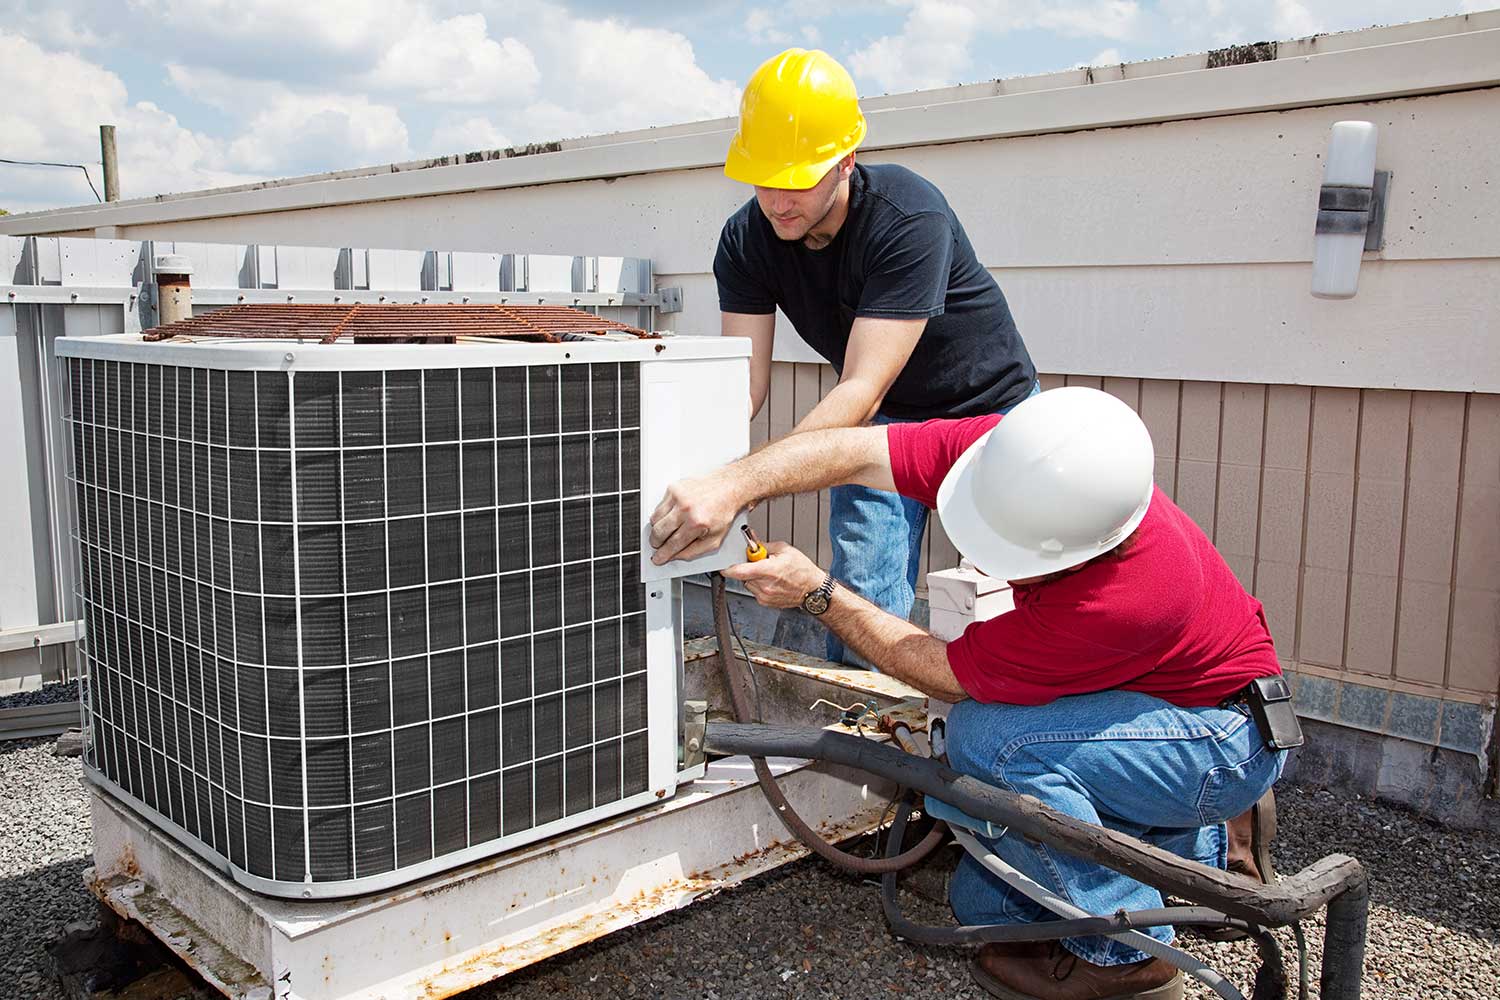 Getting proactive for Summer Heating, Ventilation, plus A/C savings